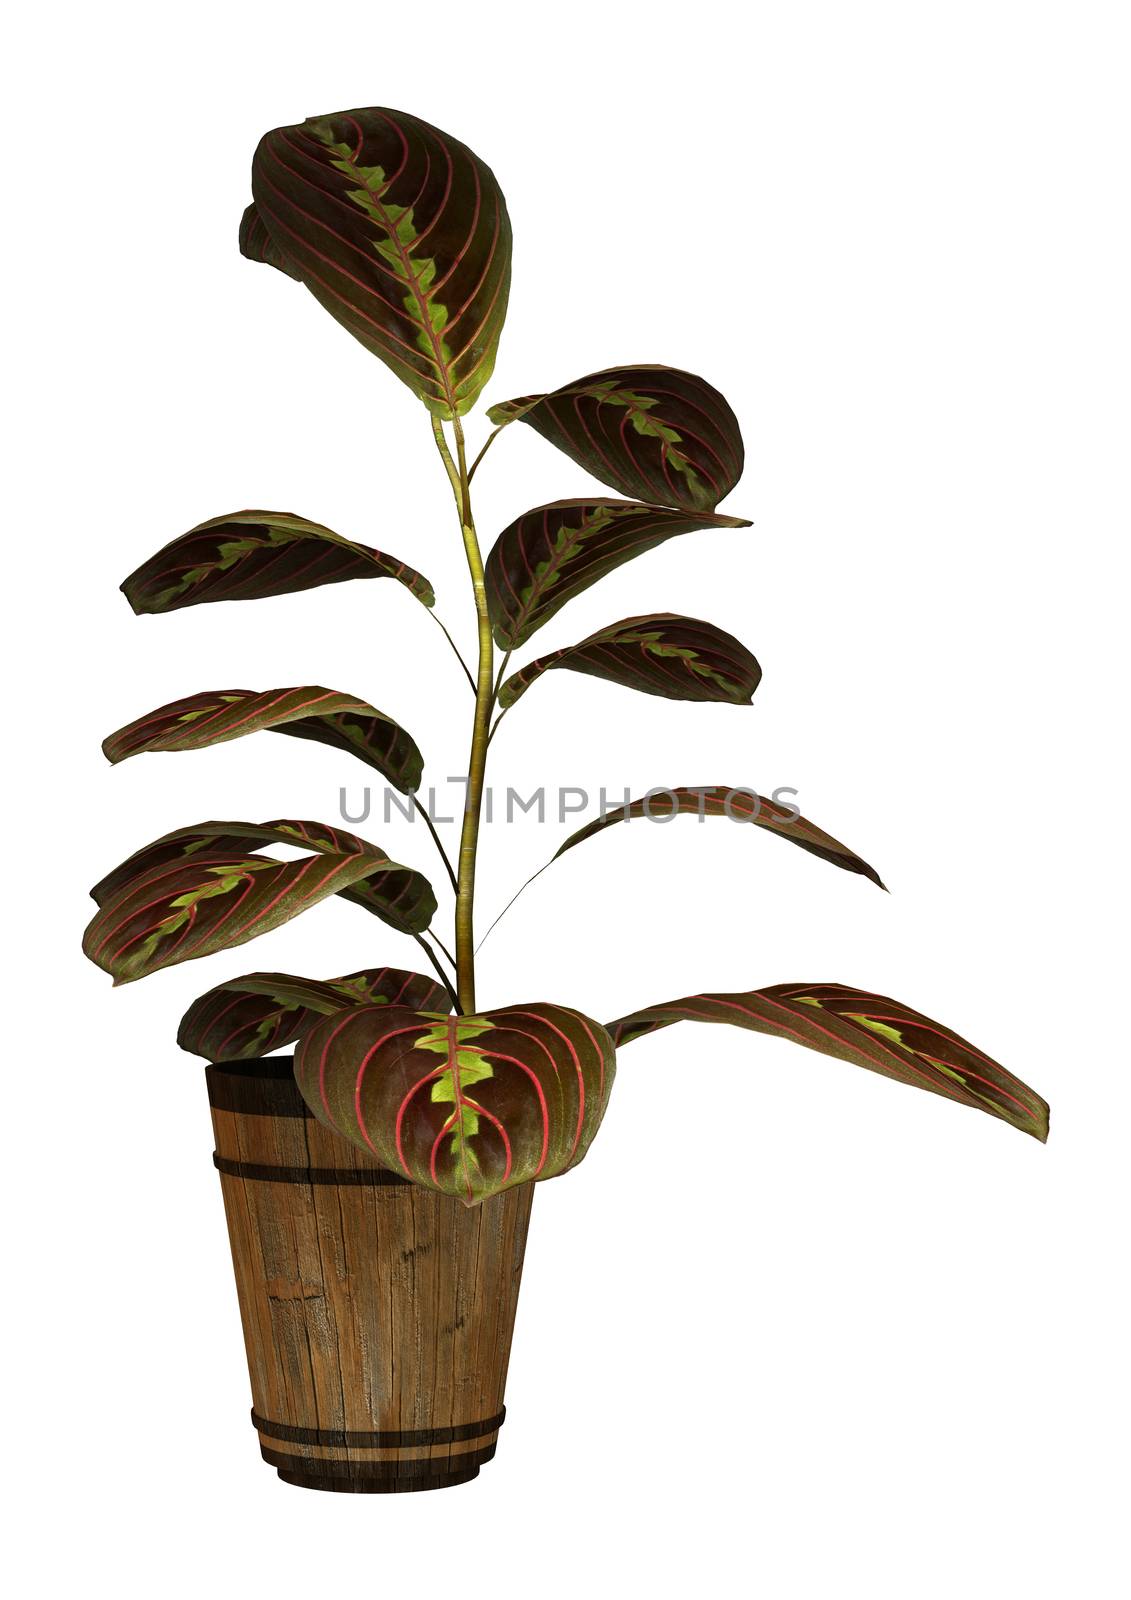 3D digital render of a prayer plant isolated on white background